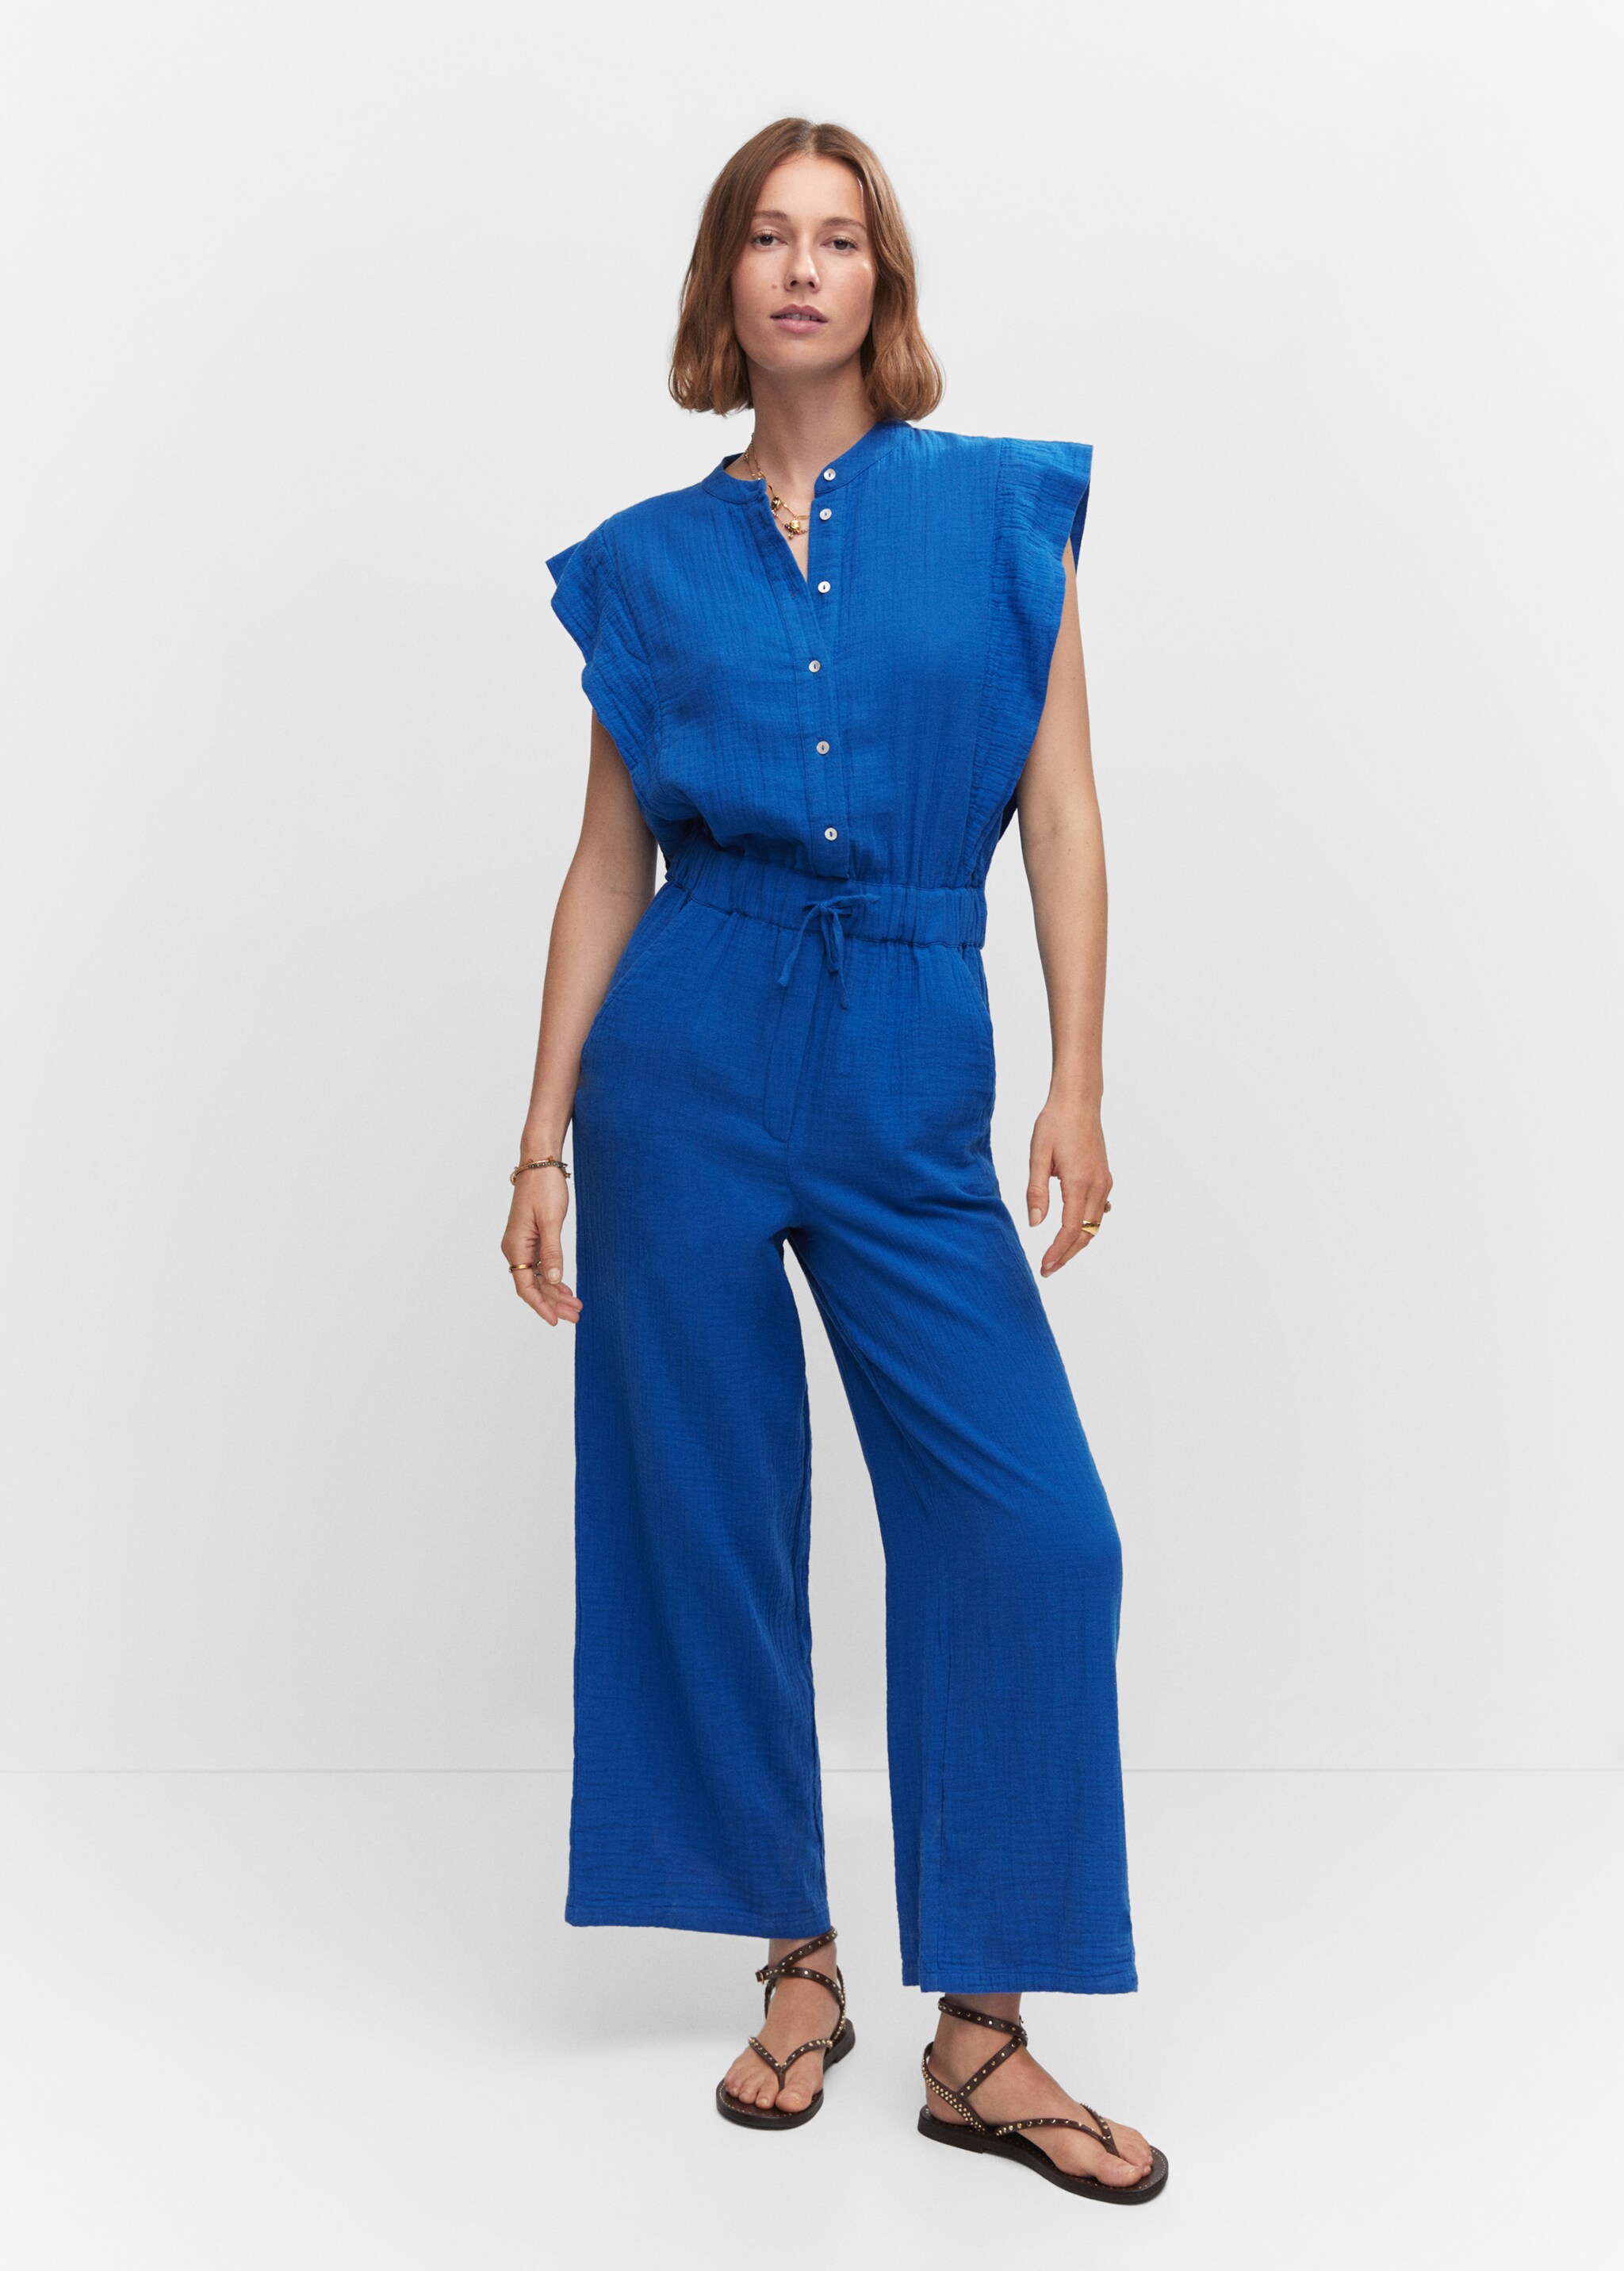 Textured jumpsuit with button - General plane